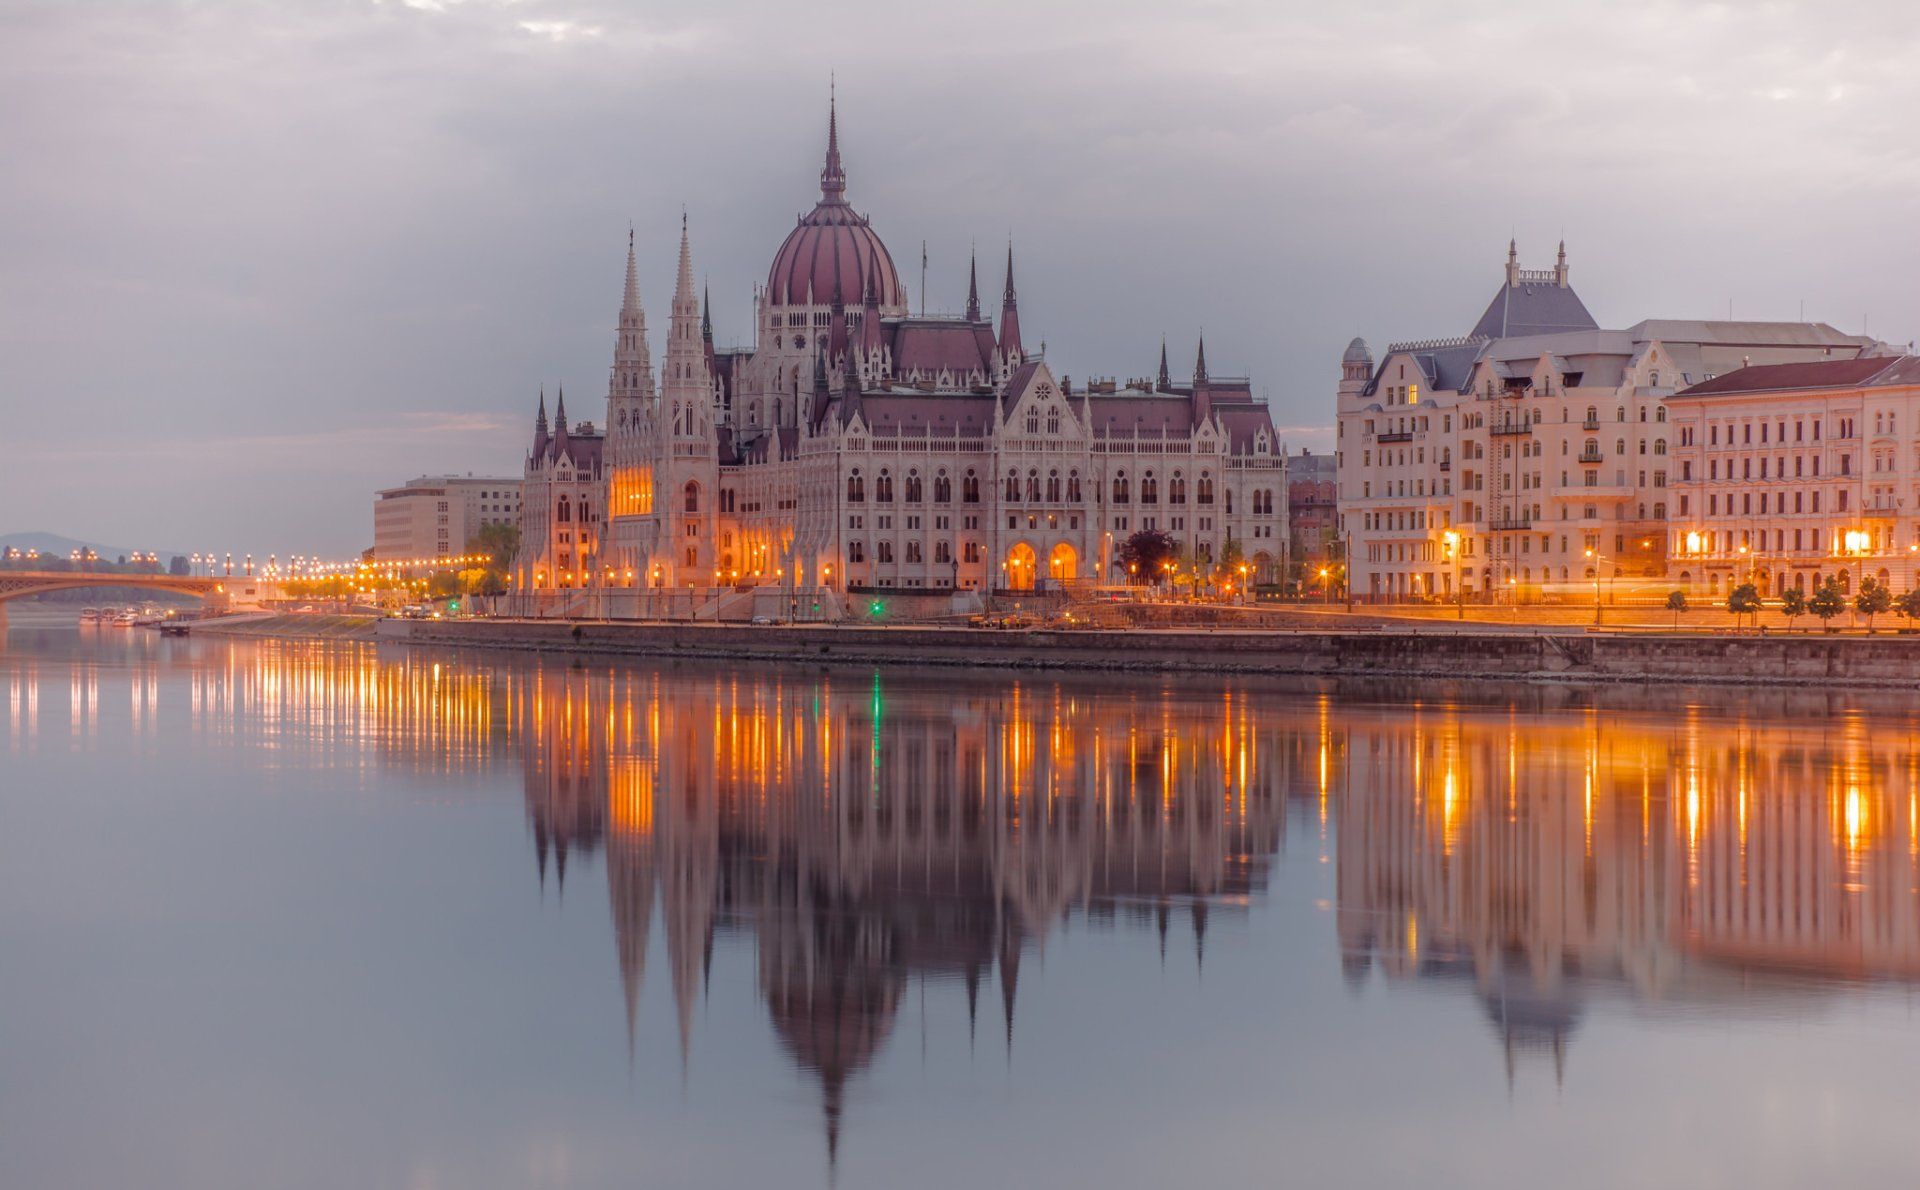 Man Made Hungarian Parliament Building Building Reflection Danube Budapest Hungary River Architecture Monument Wallp. Budapest, Europe wallpaper, Cityscape photo